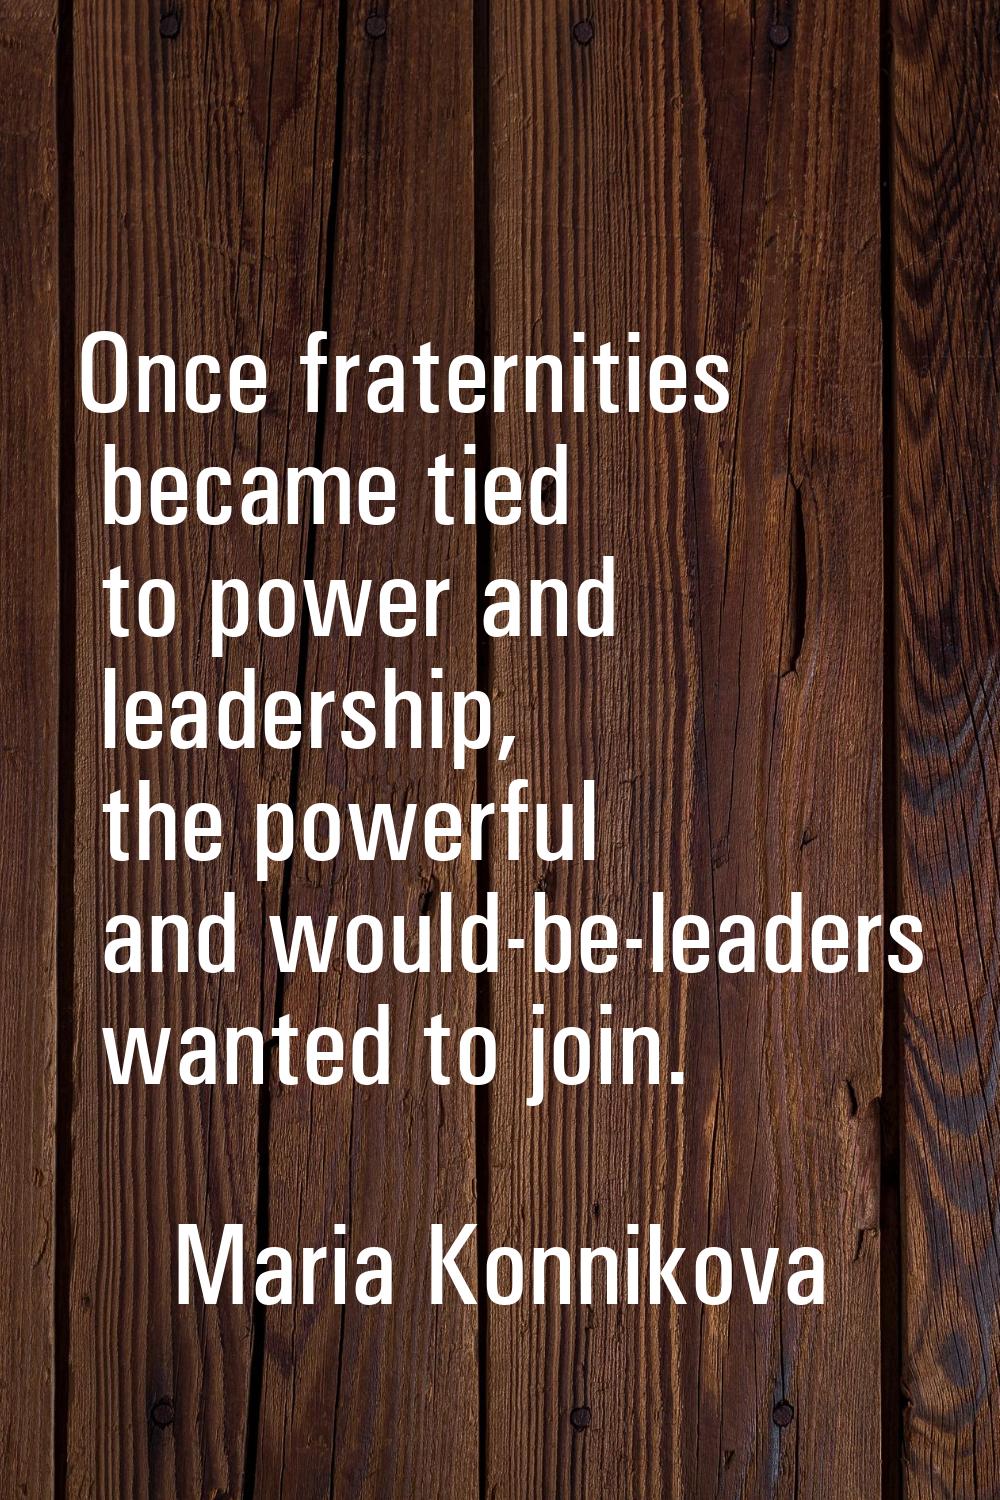 Once fraternities became tied to power and leadership, the powerful and would-be-leaders wanted to 